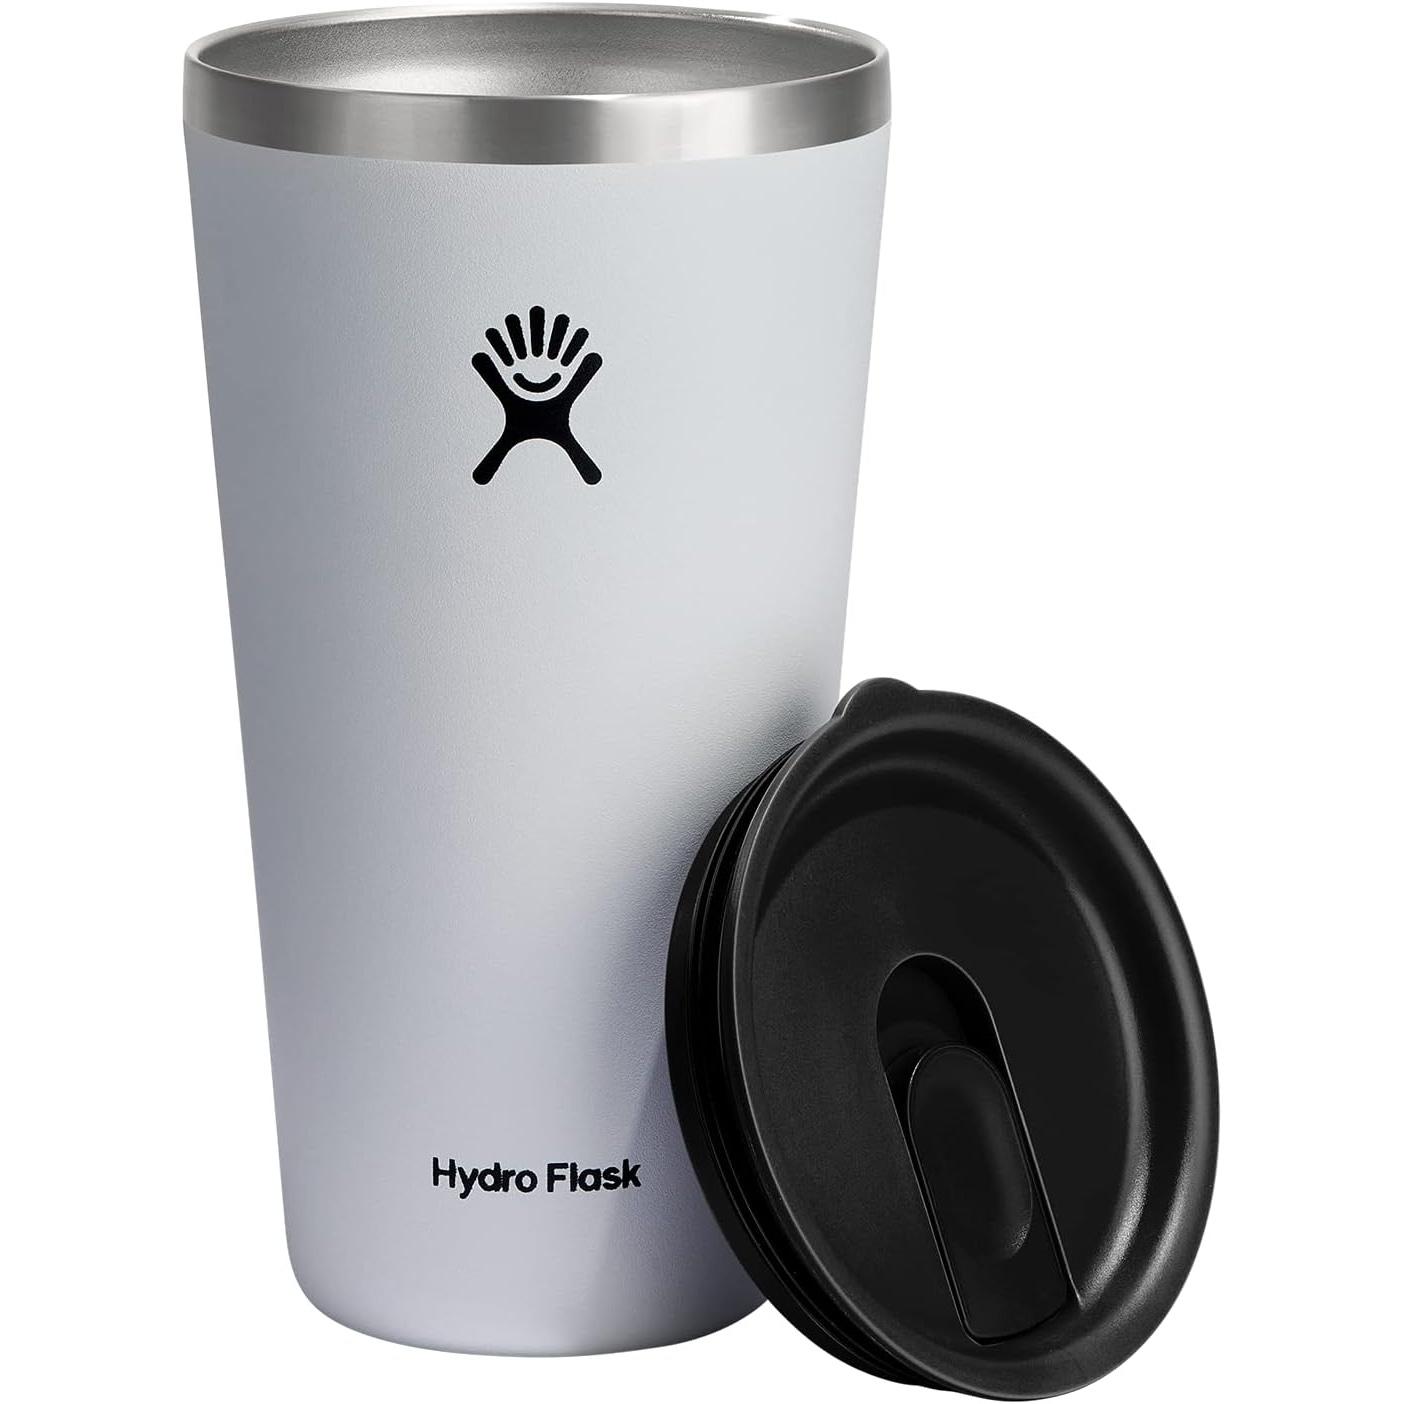 Hydro Flask All Around Stainless Steel Tumbler 28oz for $18.83